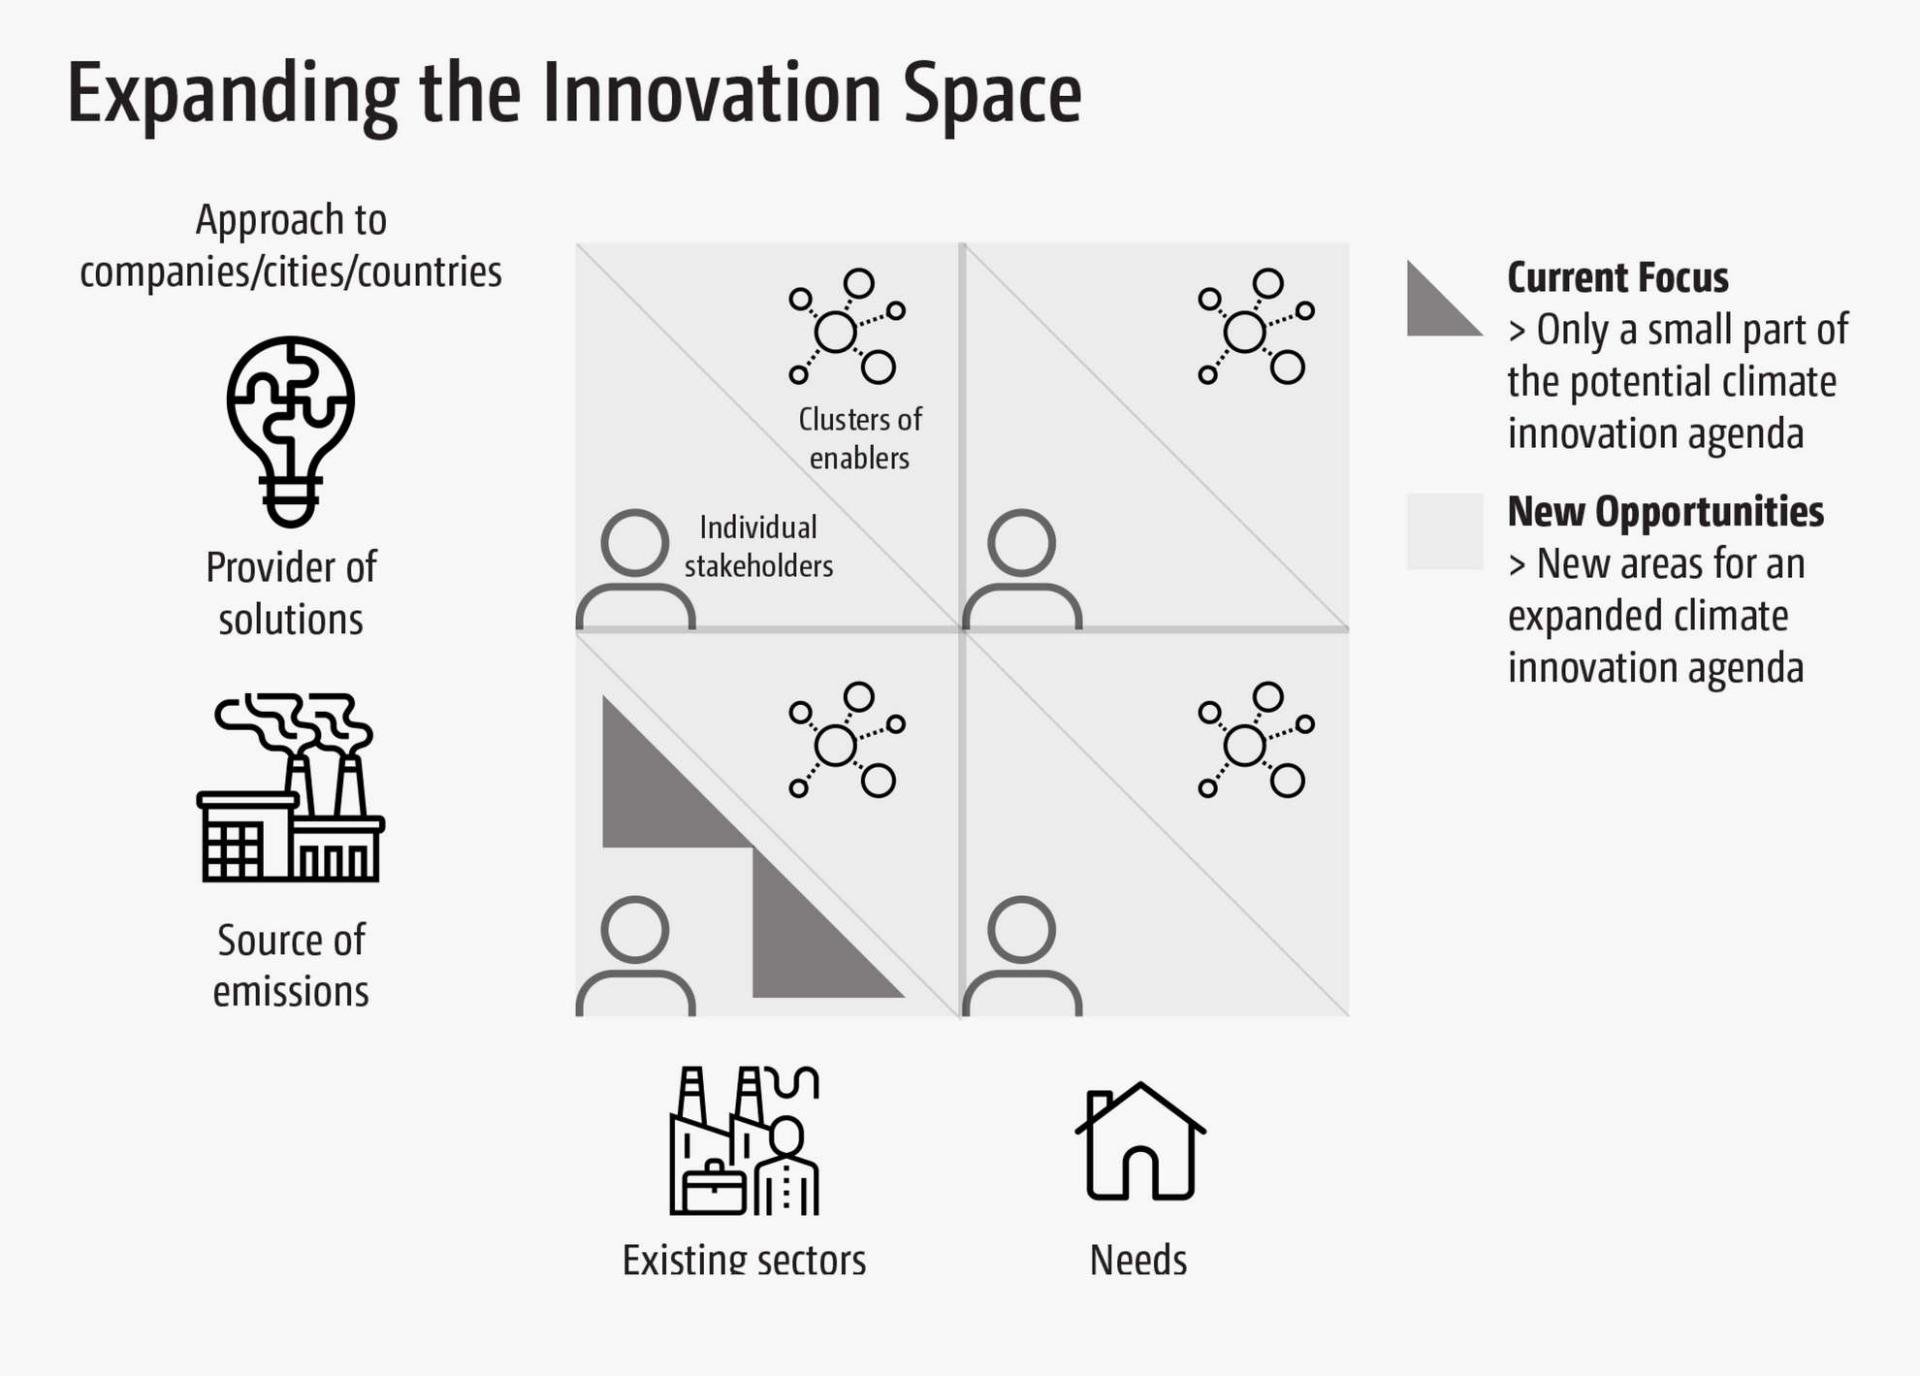 Figure illustrating the expanded innovation space.